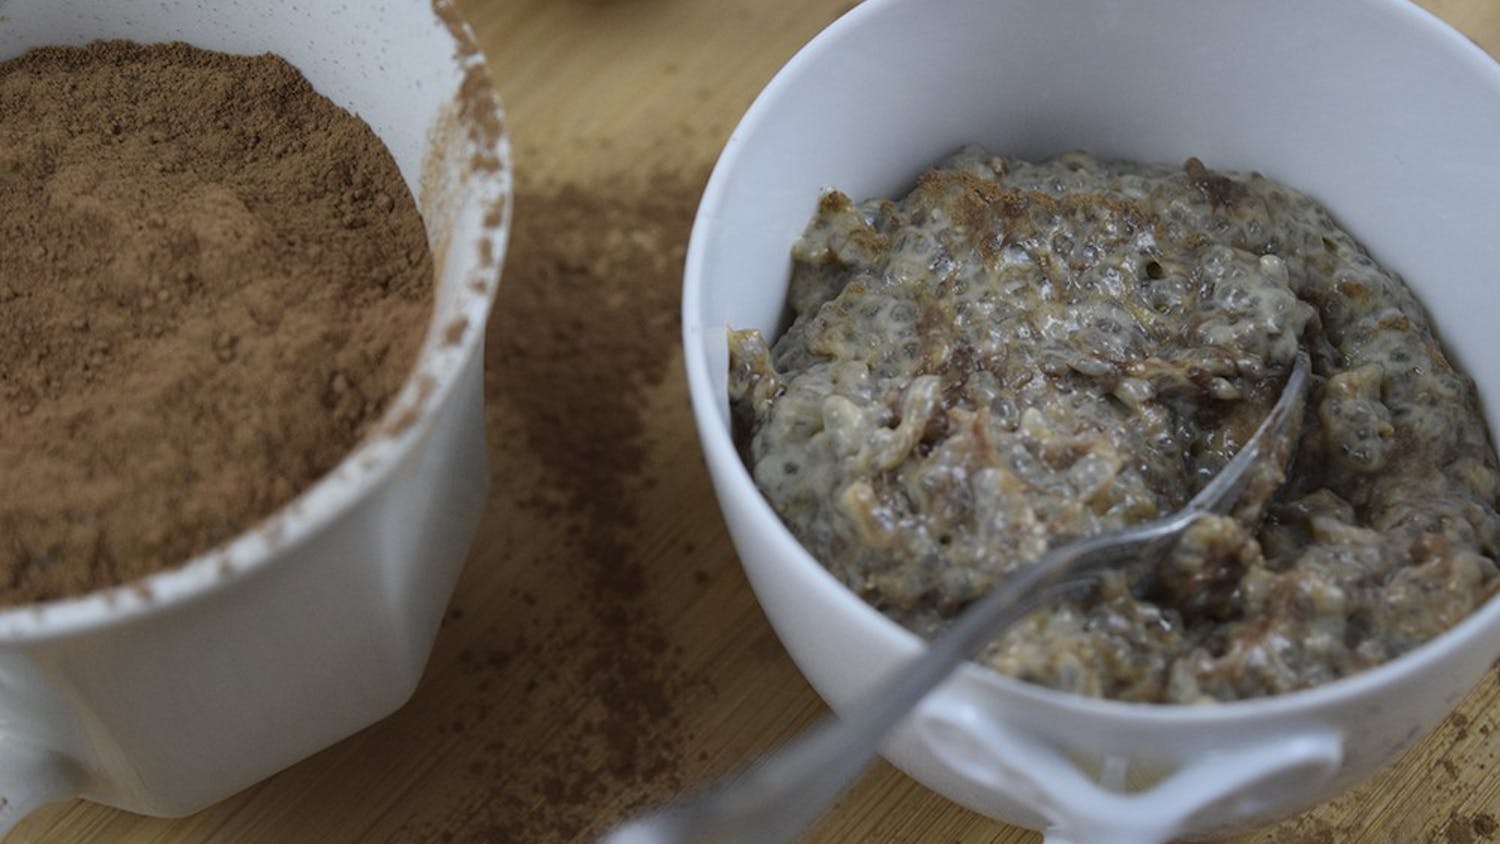 This recipe is best made overnight to let the chia seeds fully soften. Similar in texture to a tapioca pudding, this is a healthy alternative for dessert.